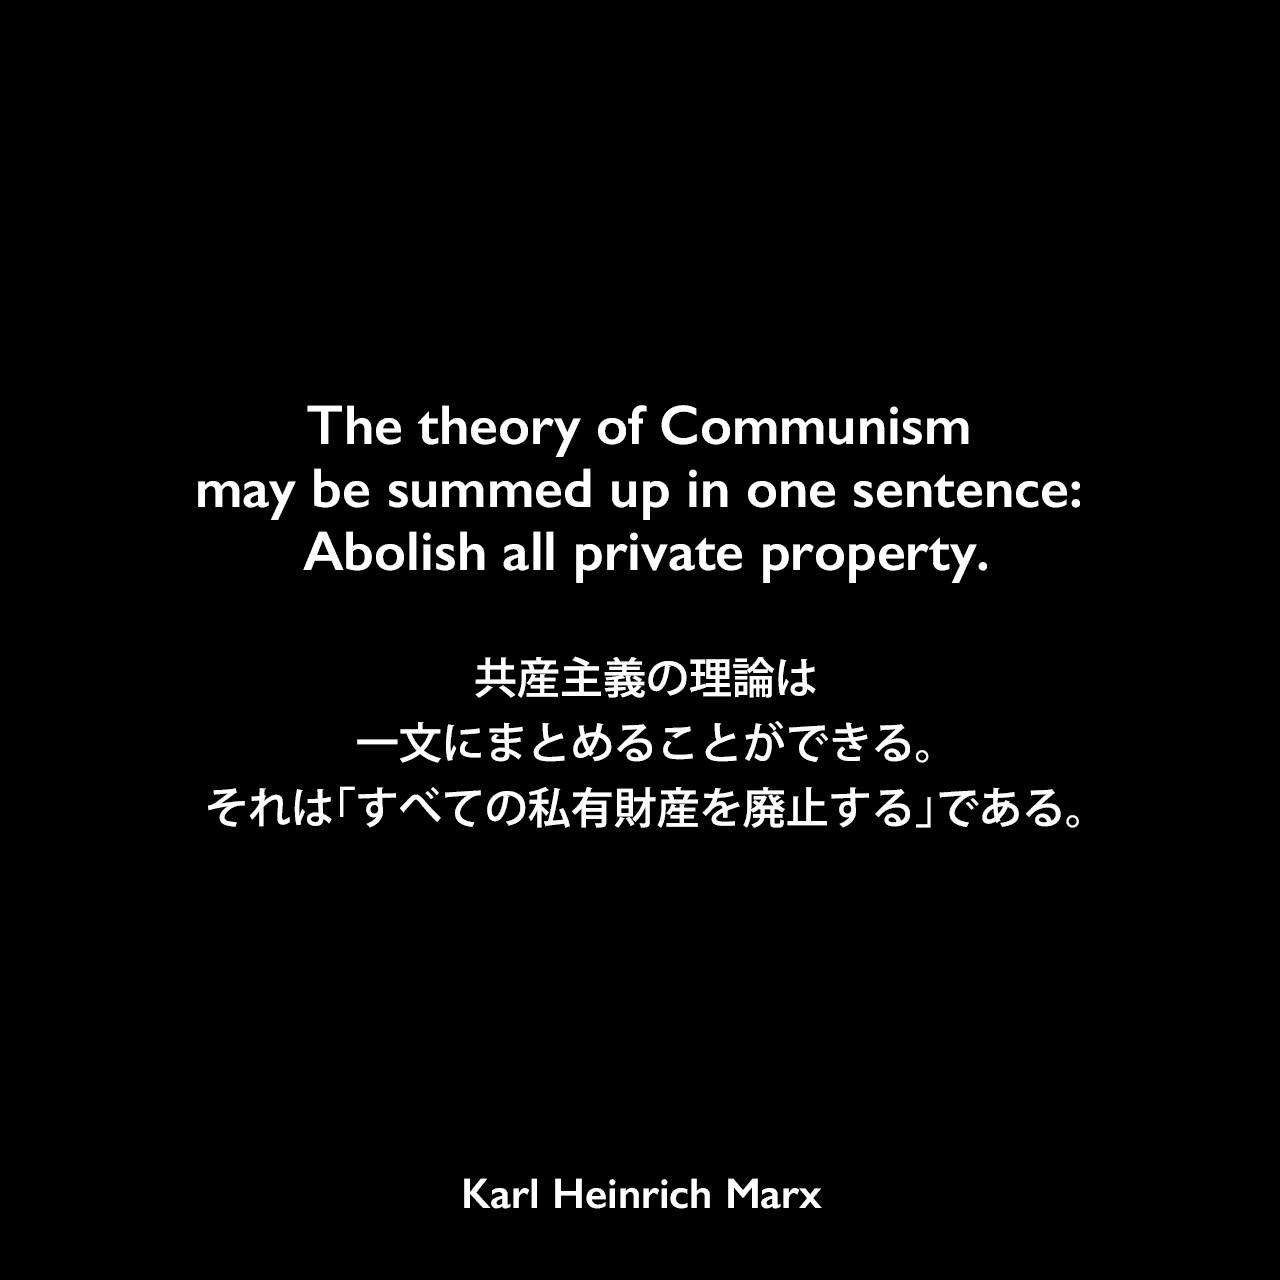 The theory of Communism may be summed up in one sentence: Abolish all private property.共産主義の理論は一文にまとめることができる。それは「すべての私有財産を廃止する」である。- カール・マルクス とフリードリヒ・エンゲルスの共著「共産党宣言」よりKarl Heinrich Marx